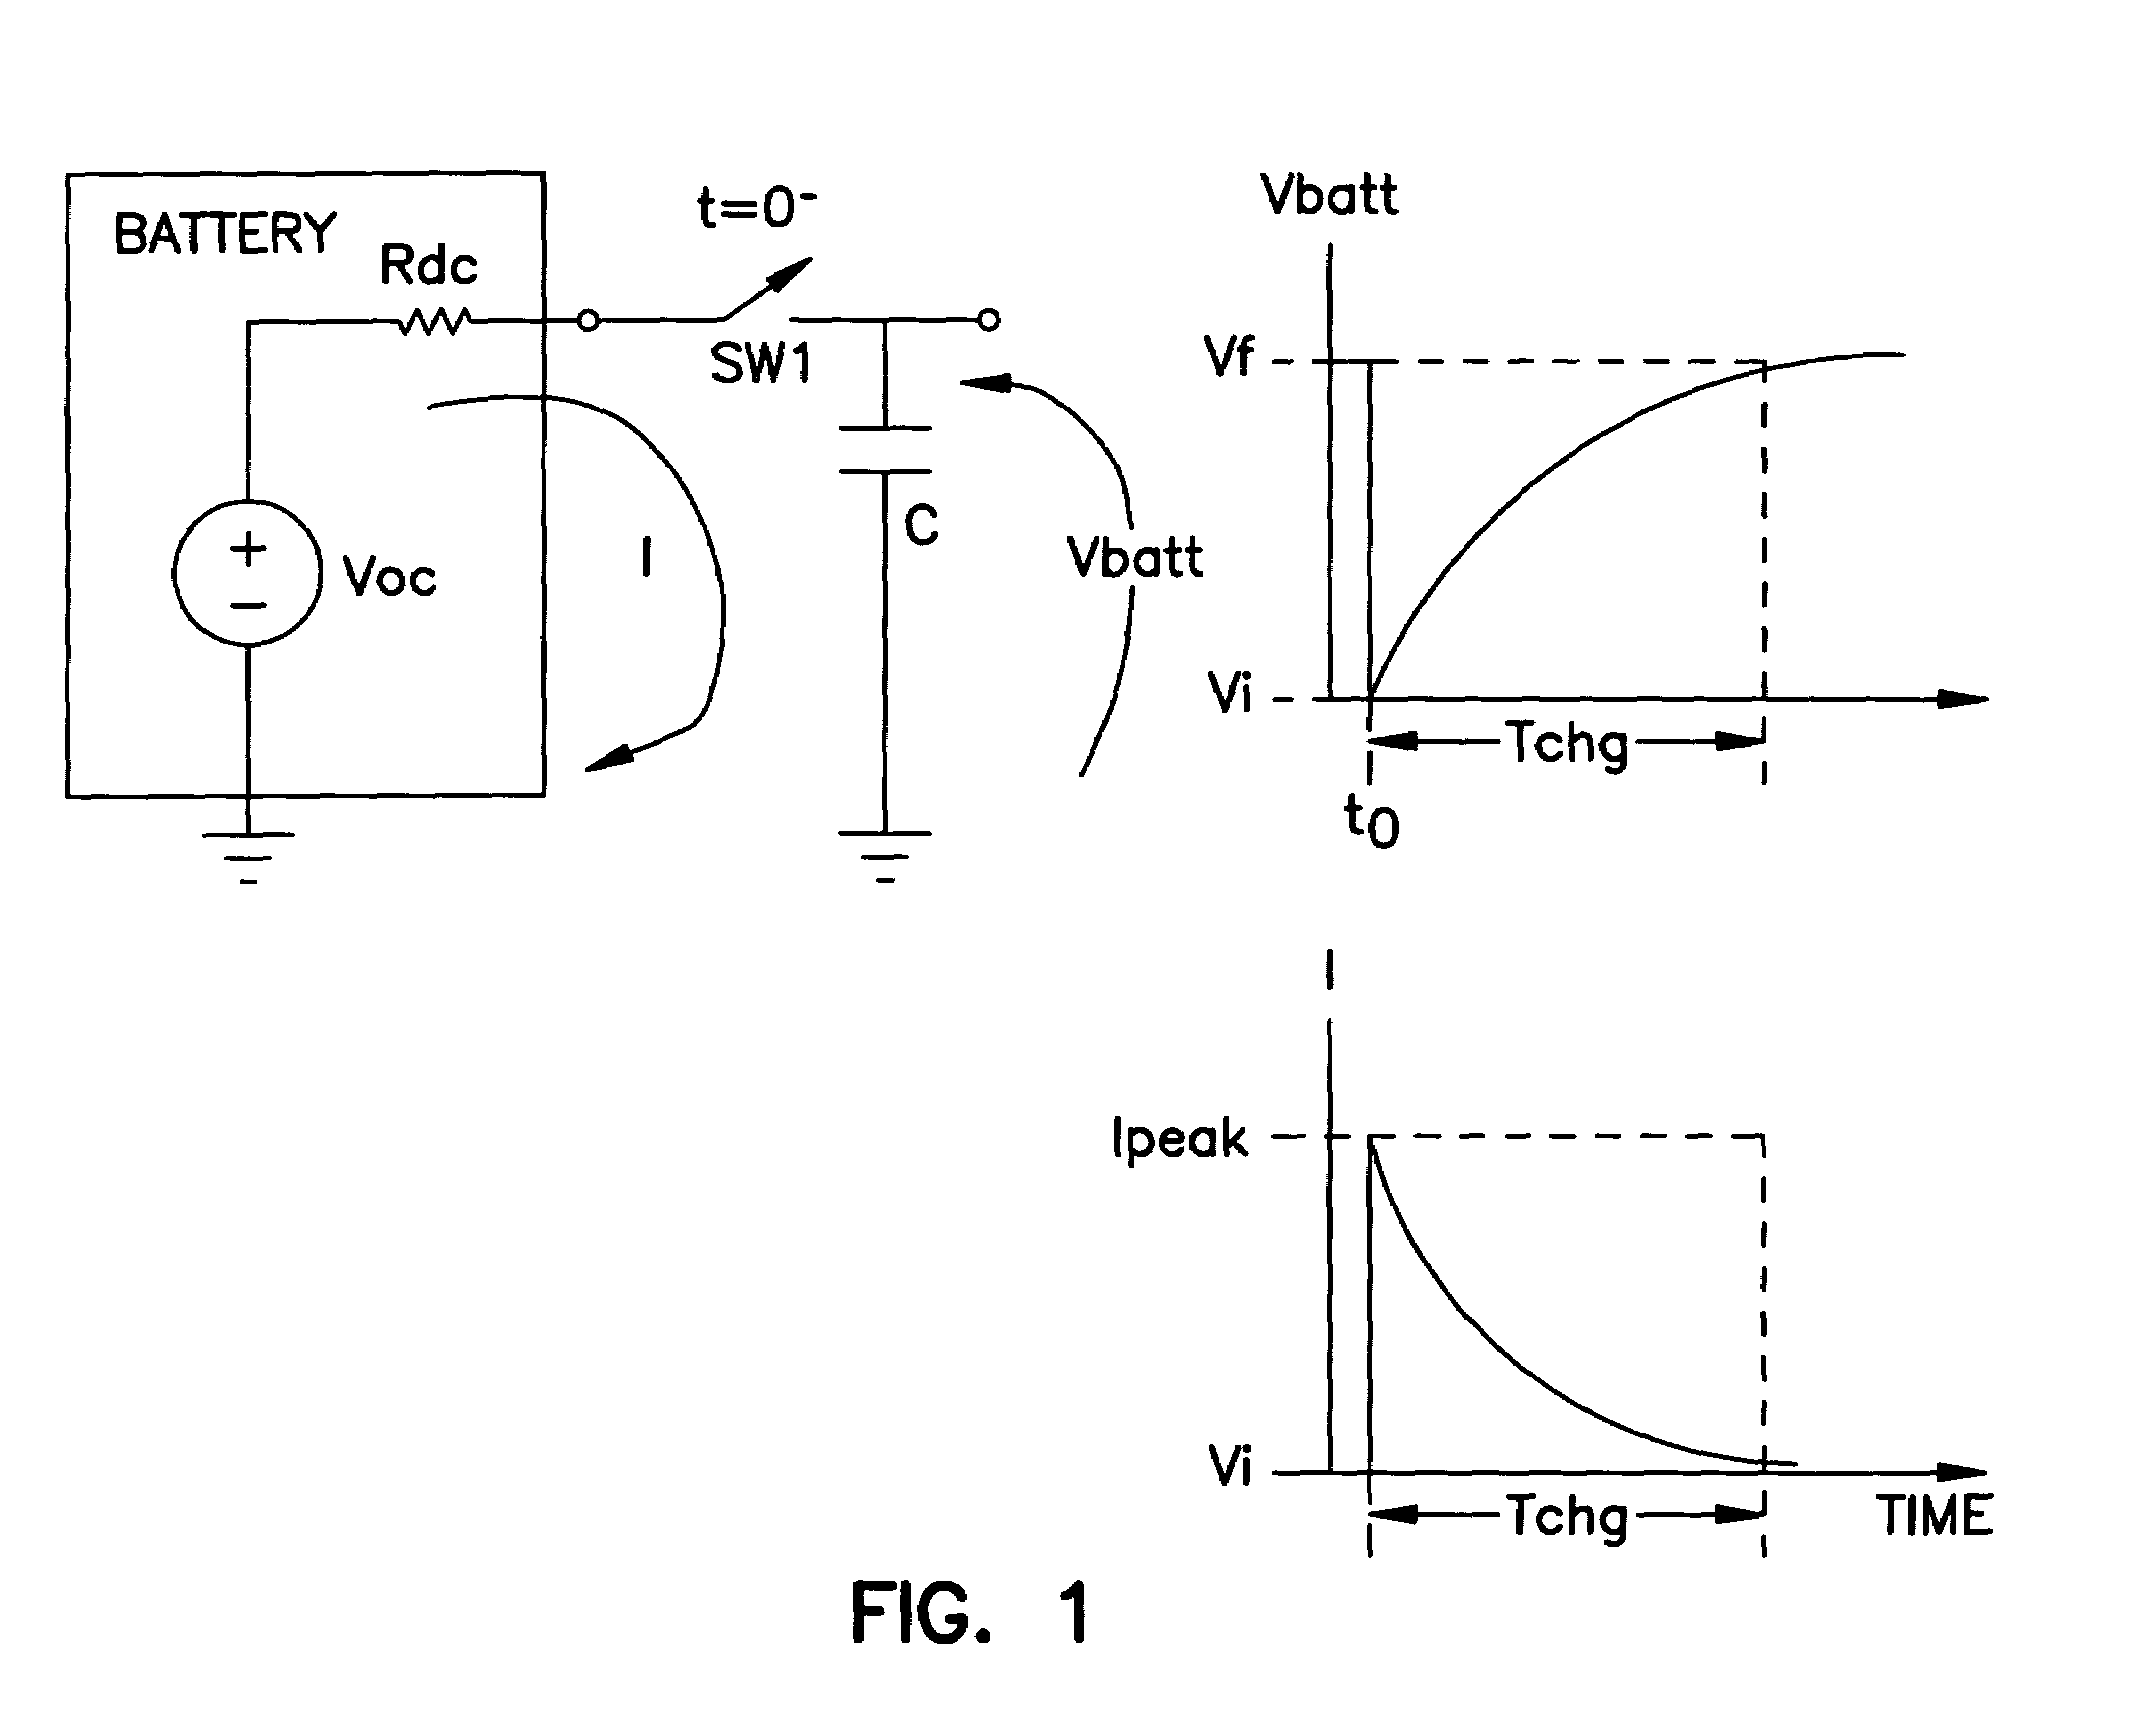 Method for monitoring end of life for battery